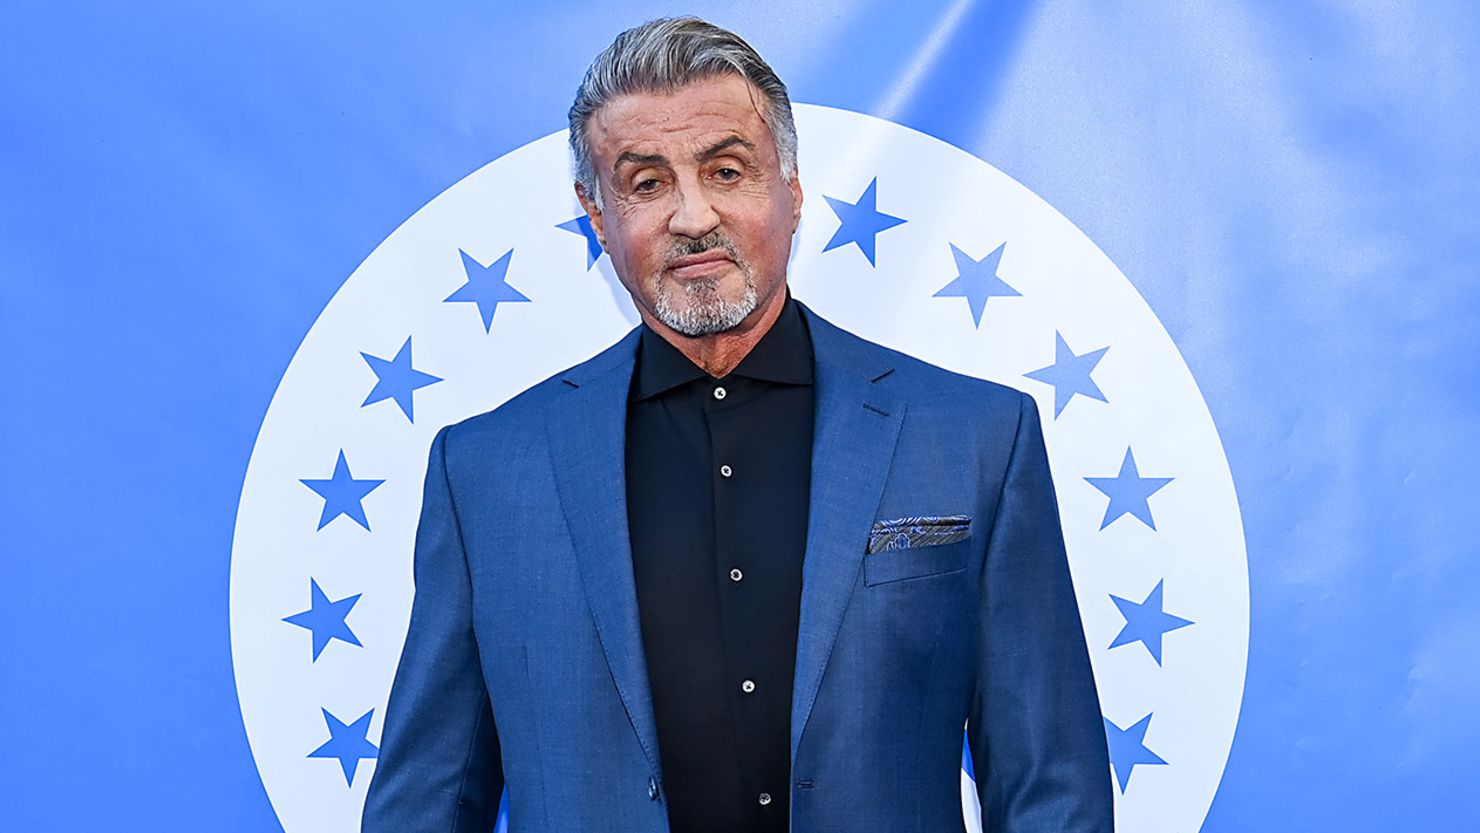 Sylvester Stallone wearing a blue coat